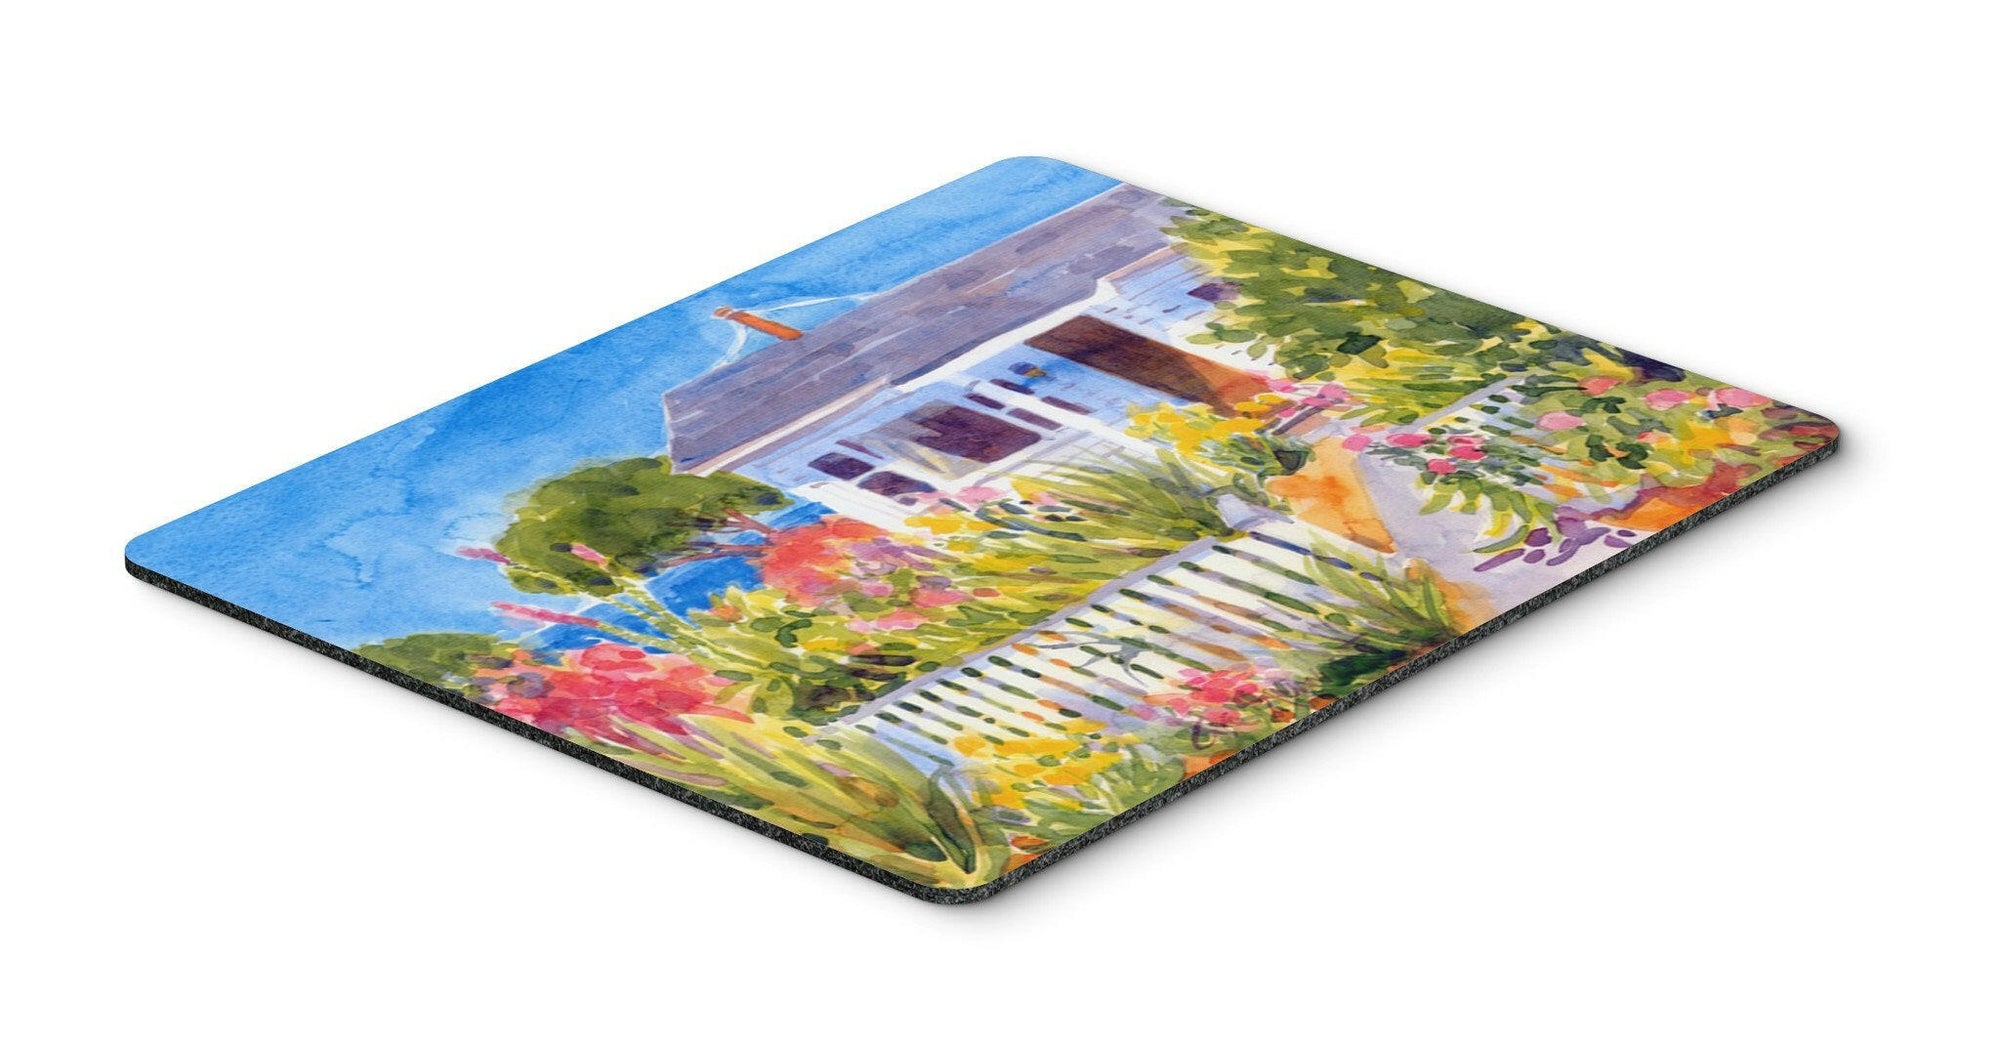 Seaside Beach Cottage  Mouse pad, hot pad, or trivet by Caroline's Treasures